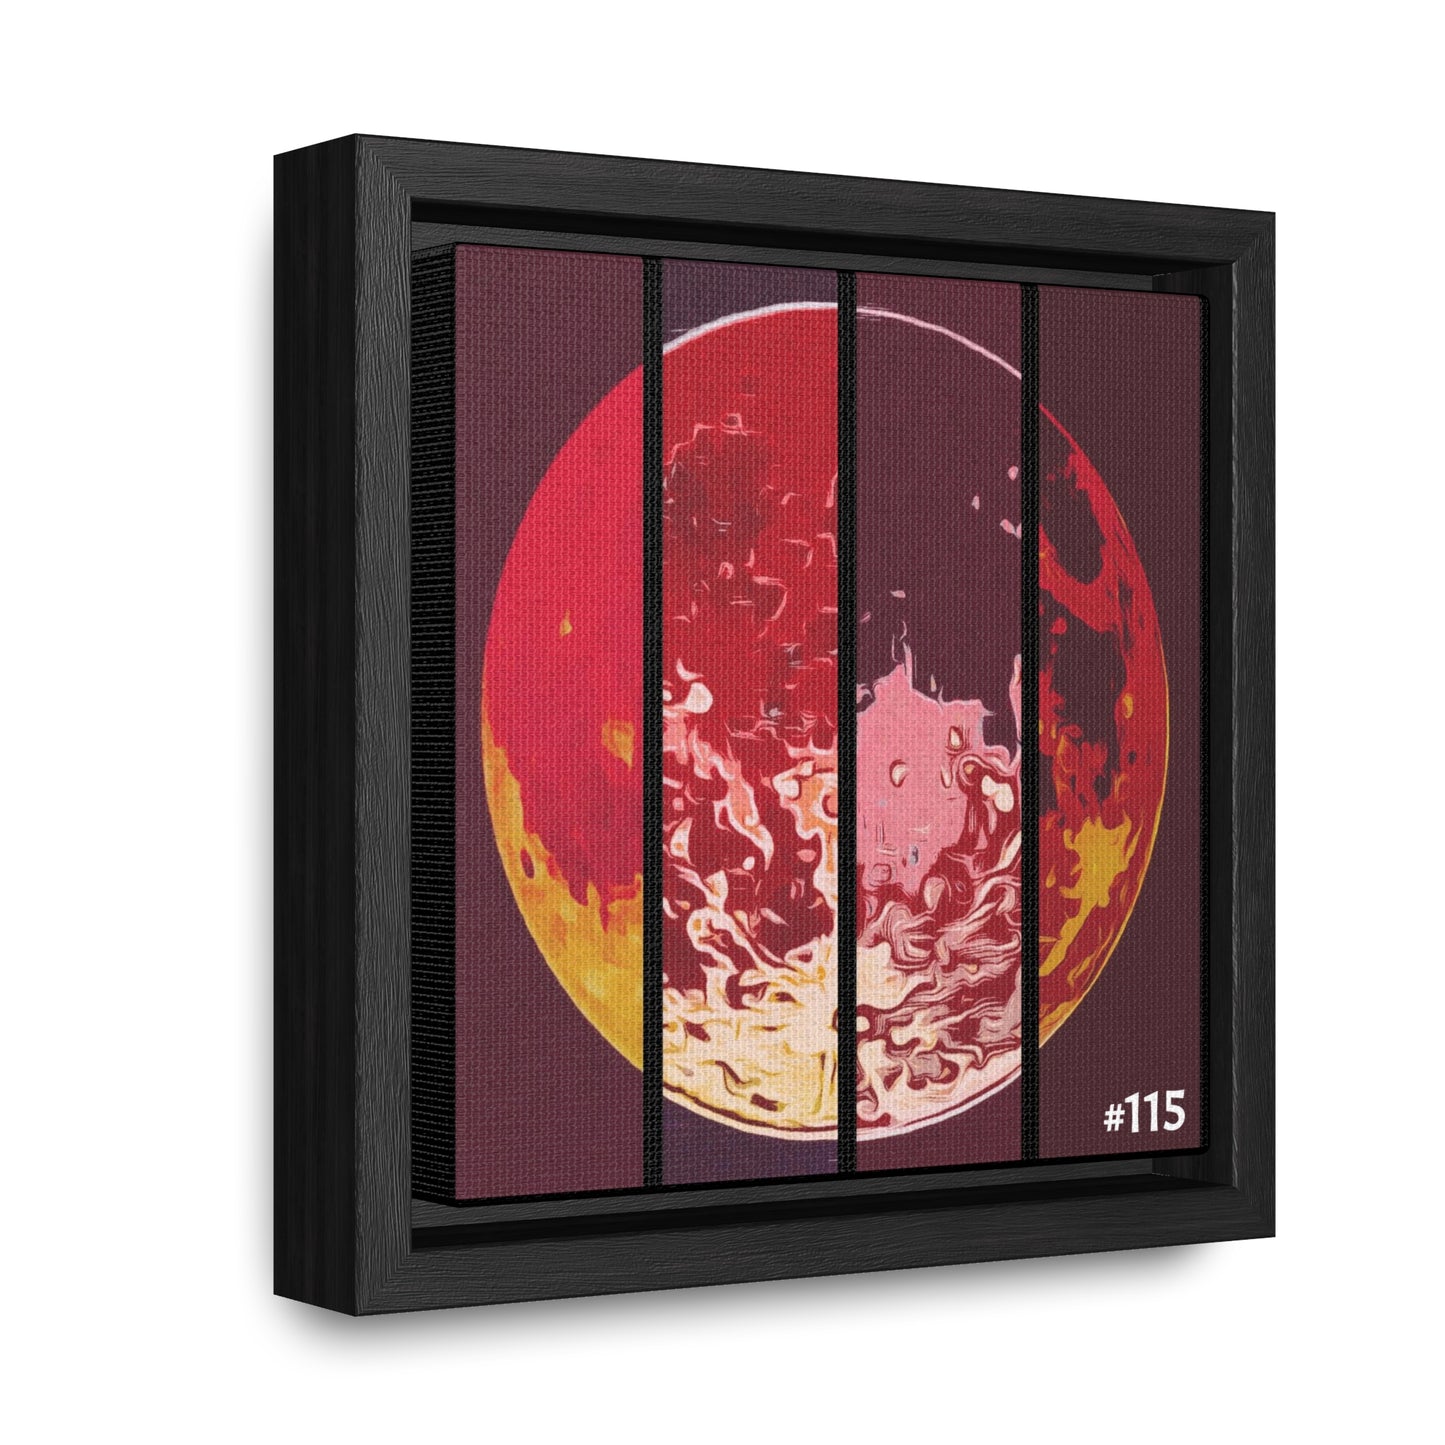 #115 - Made with Miracles Miniature Collectable Wood Framed Canvas Wall Art, 3 sizes available - 2018 Chinese Eclipse